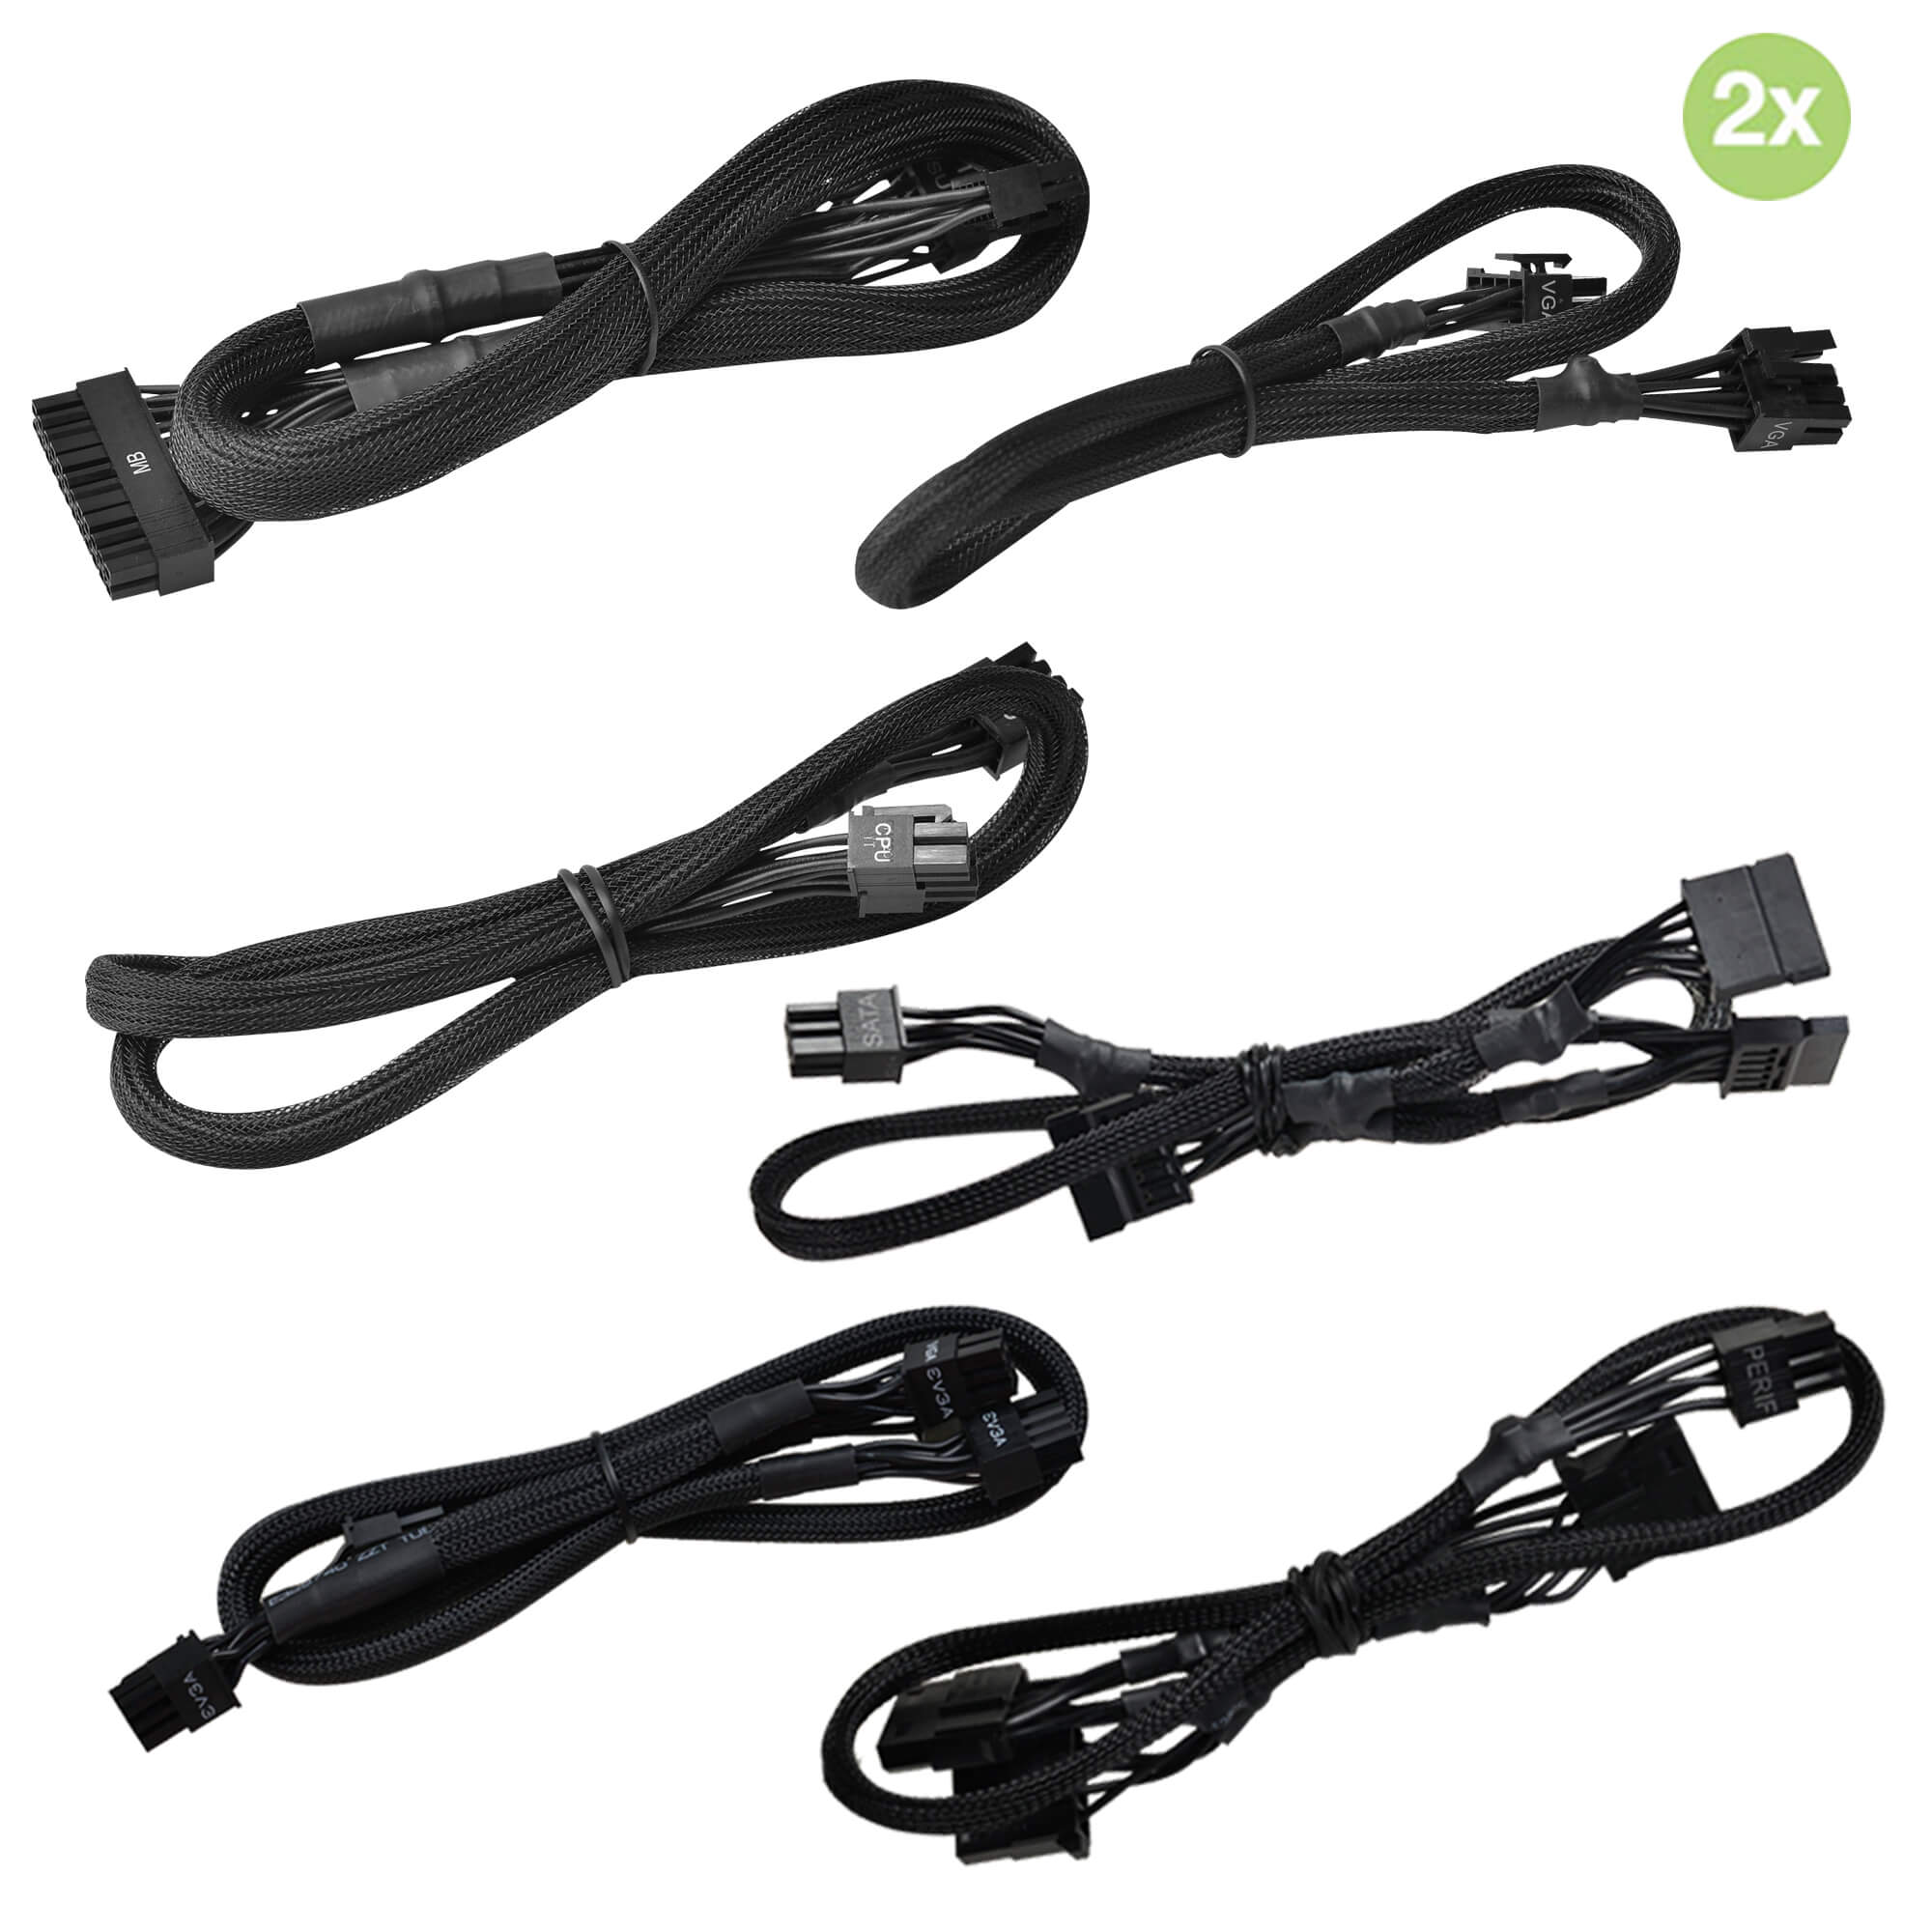 Evga Latam Productos Ba B3 B5 G2 G3 G5 Gp Gm P2 Pq T2 Black Power Supply Cable Set Sleeved 101 Ck 0850 B9